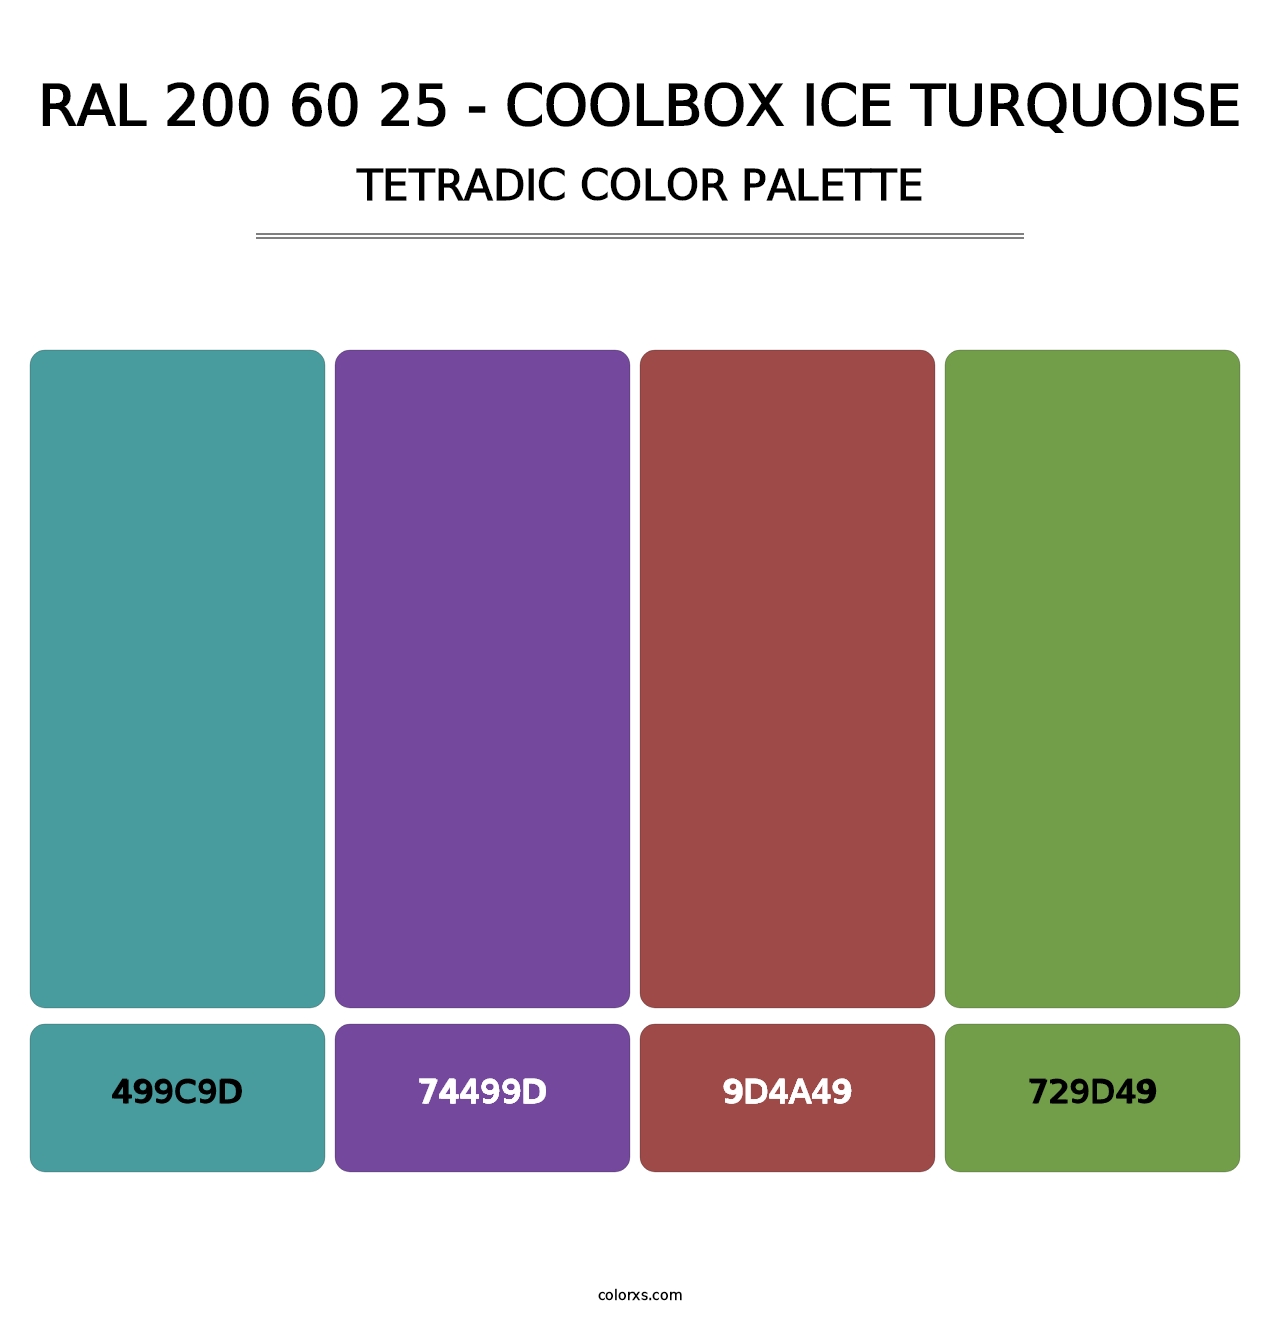 RAL 200 60 25 - Coolbox Ice Turquoise - Tetradic Color Palette